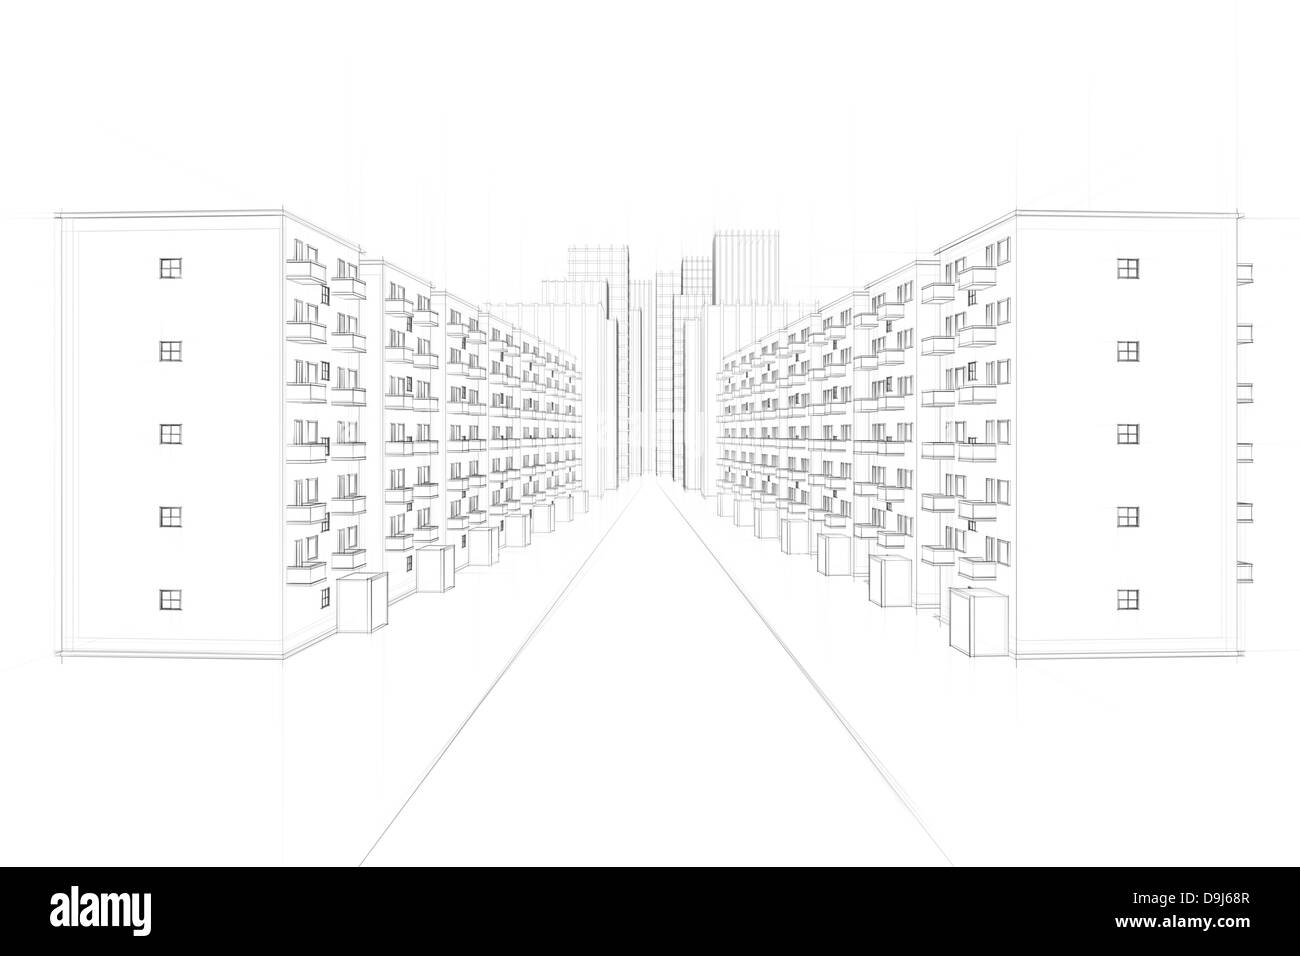 drawing of a city street with houses and skyscrapers Stock Photo